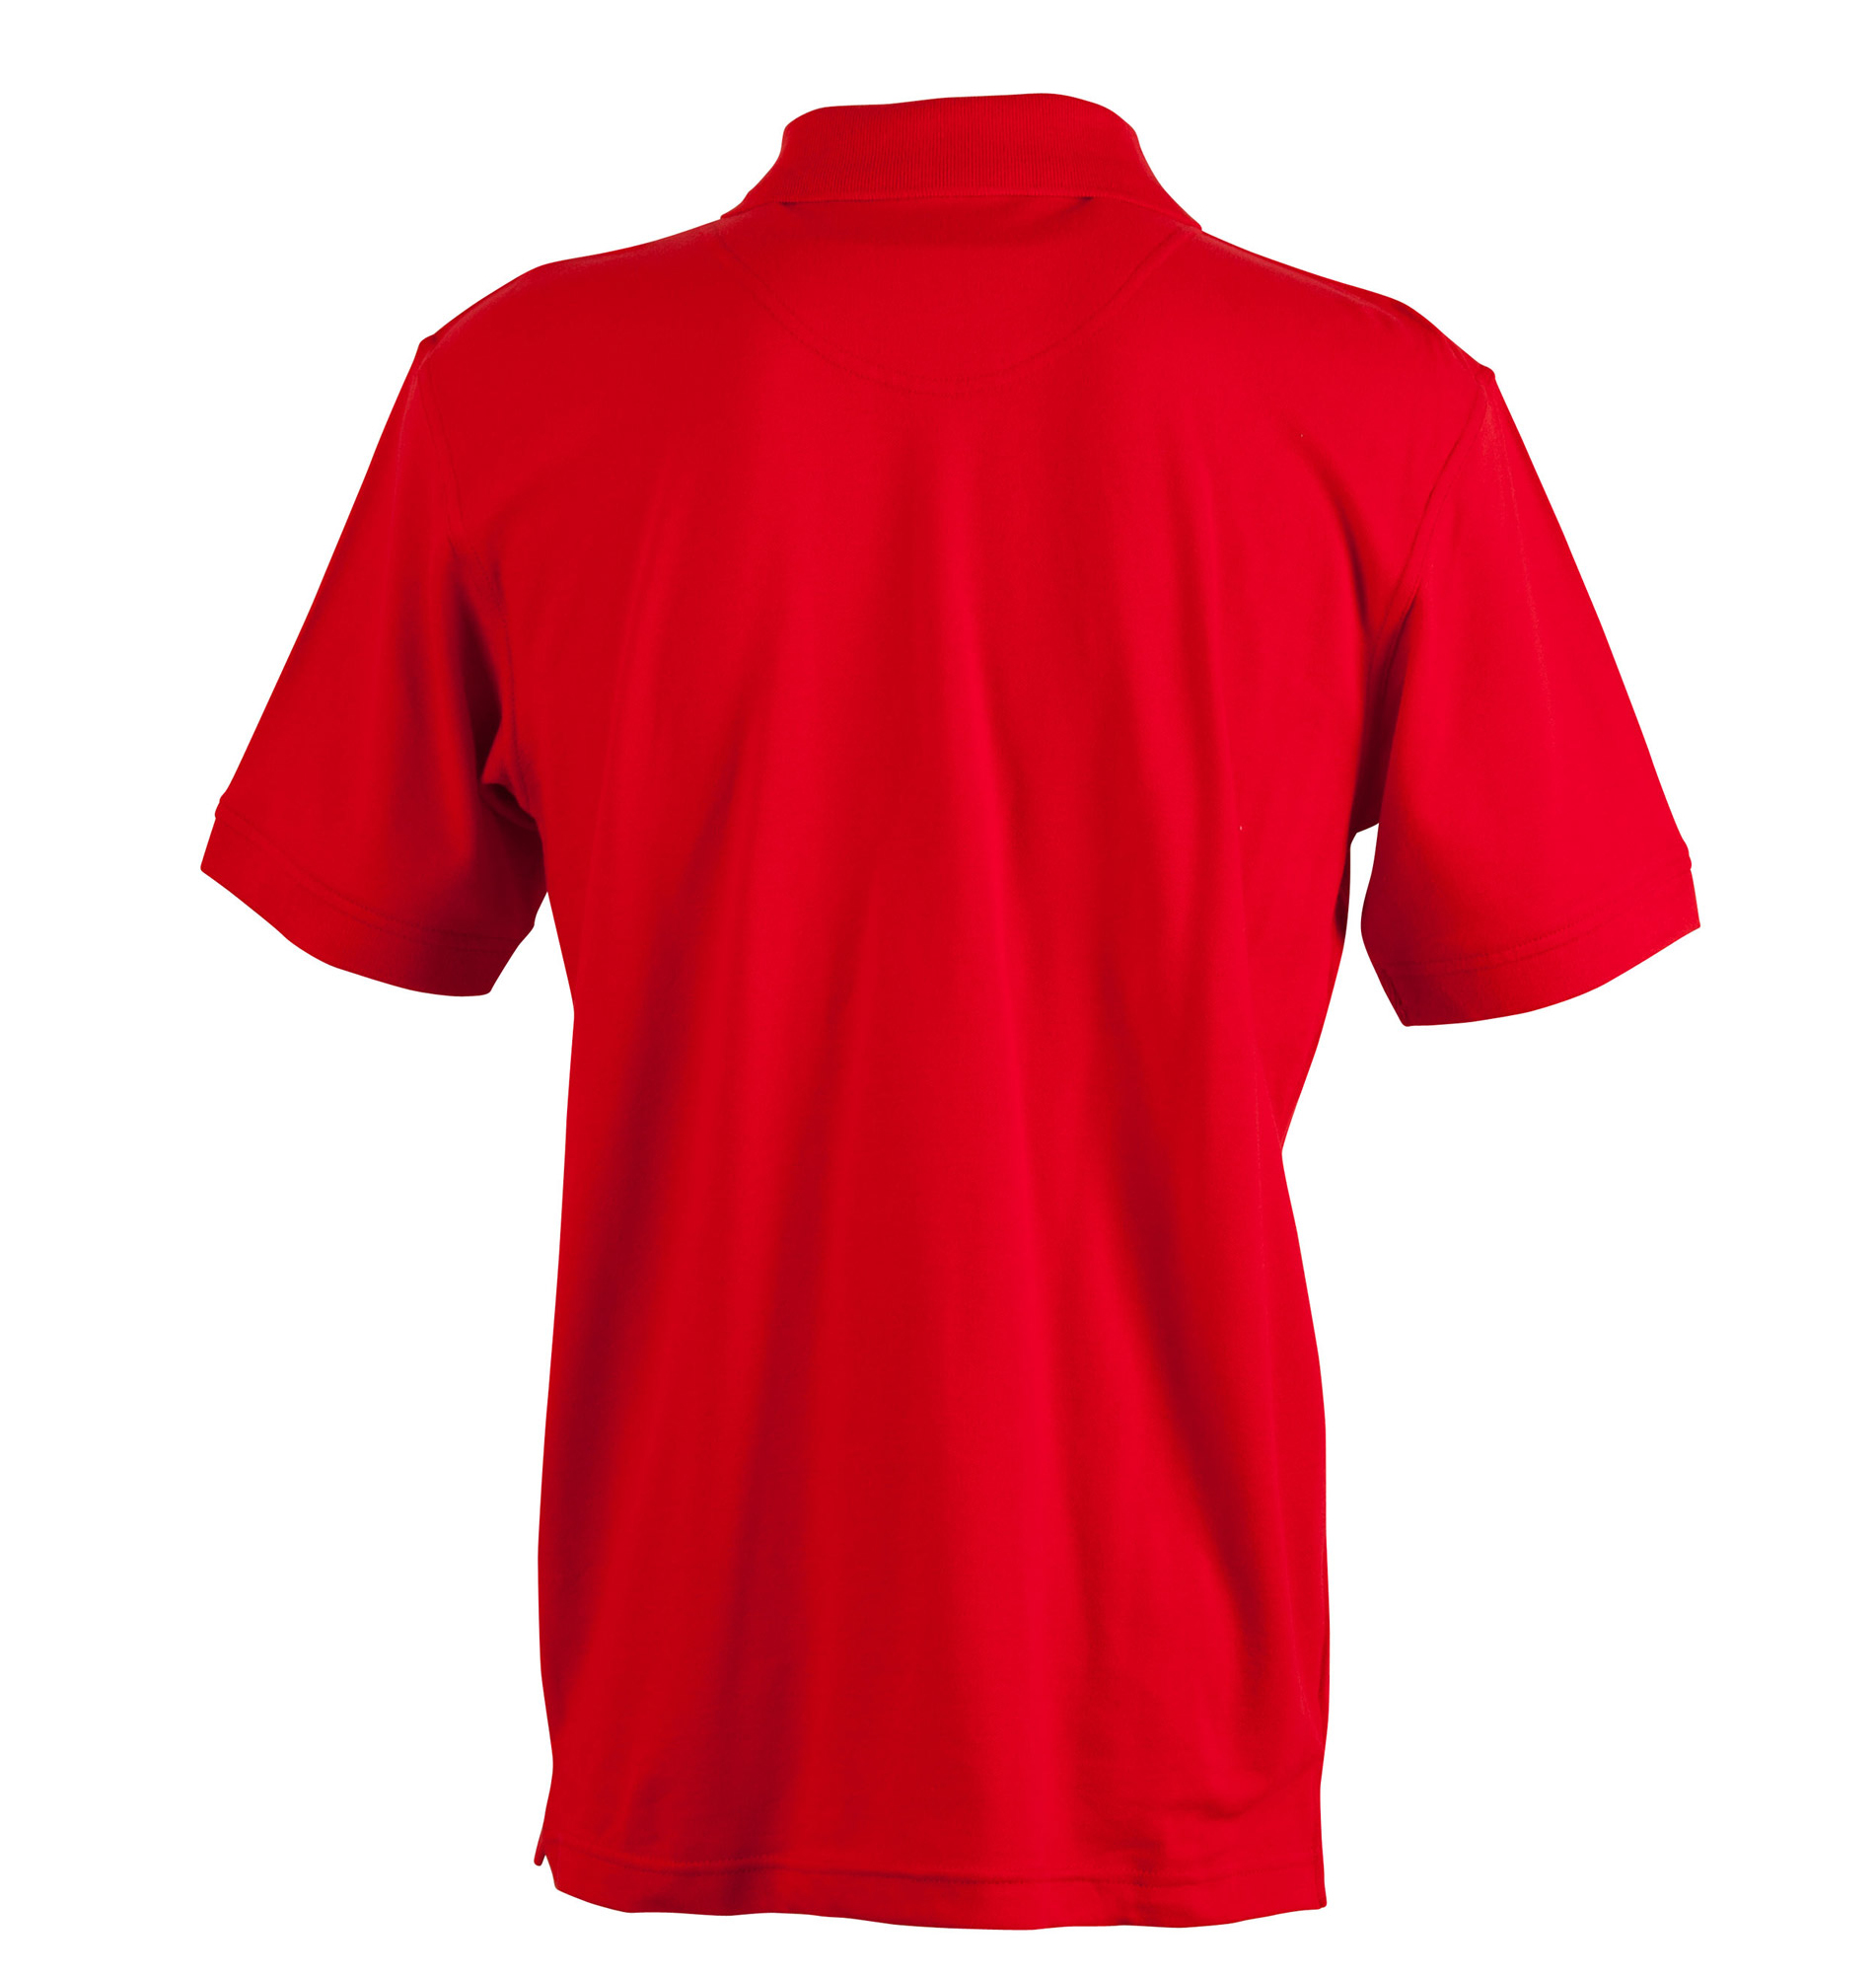 Mode Shirts Polo shirts Darling Harbour Polo shirt rood-wit volledige print casual uitstraling 